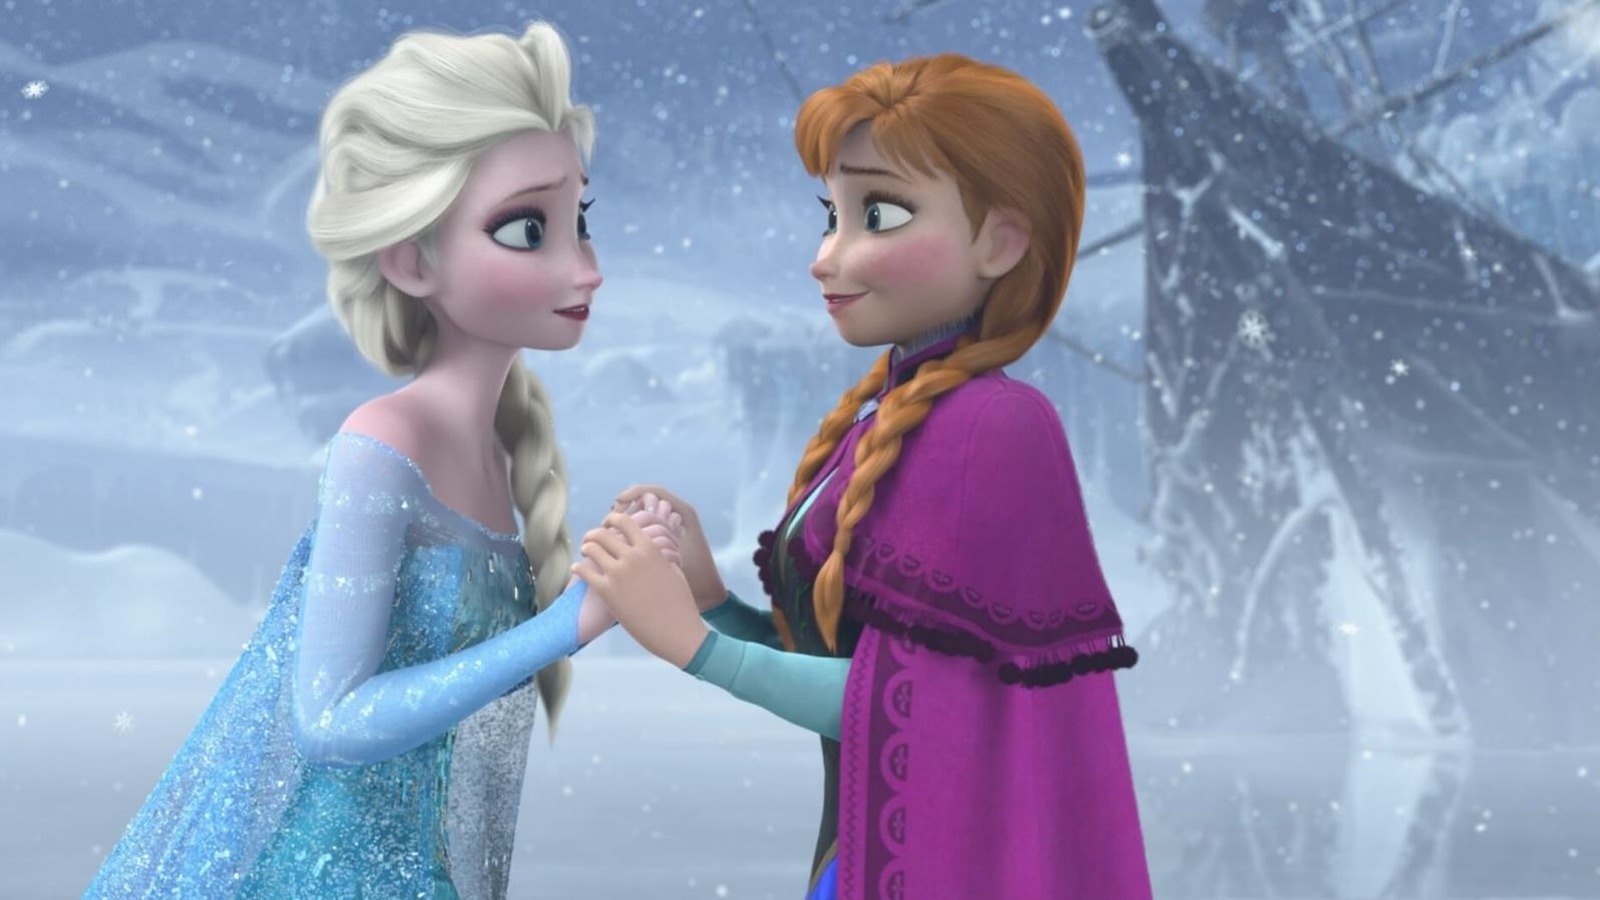 My love for tragic movies was prompted by a Disney's 'Frozen